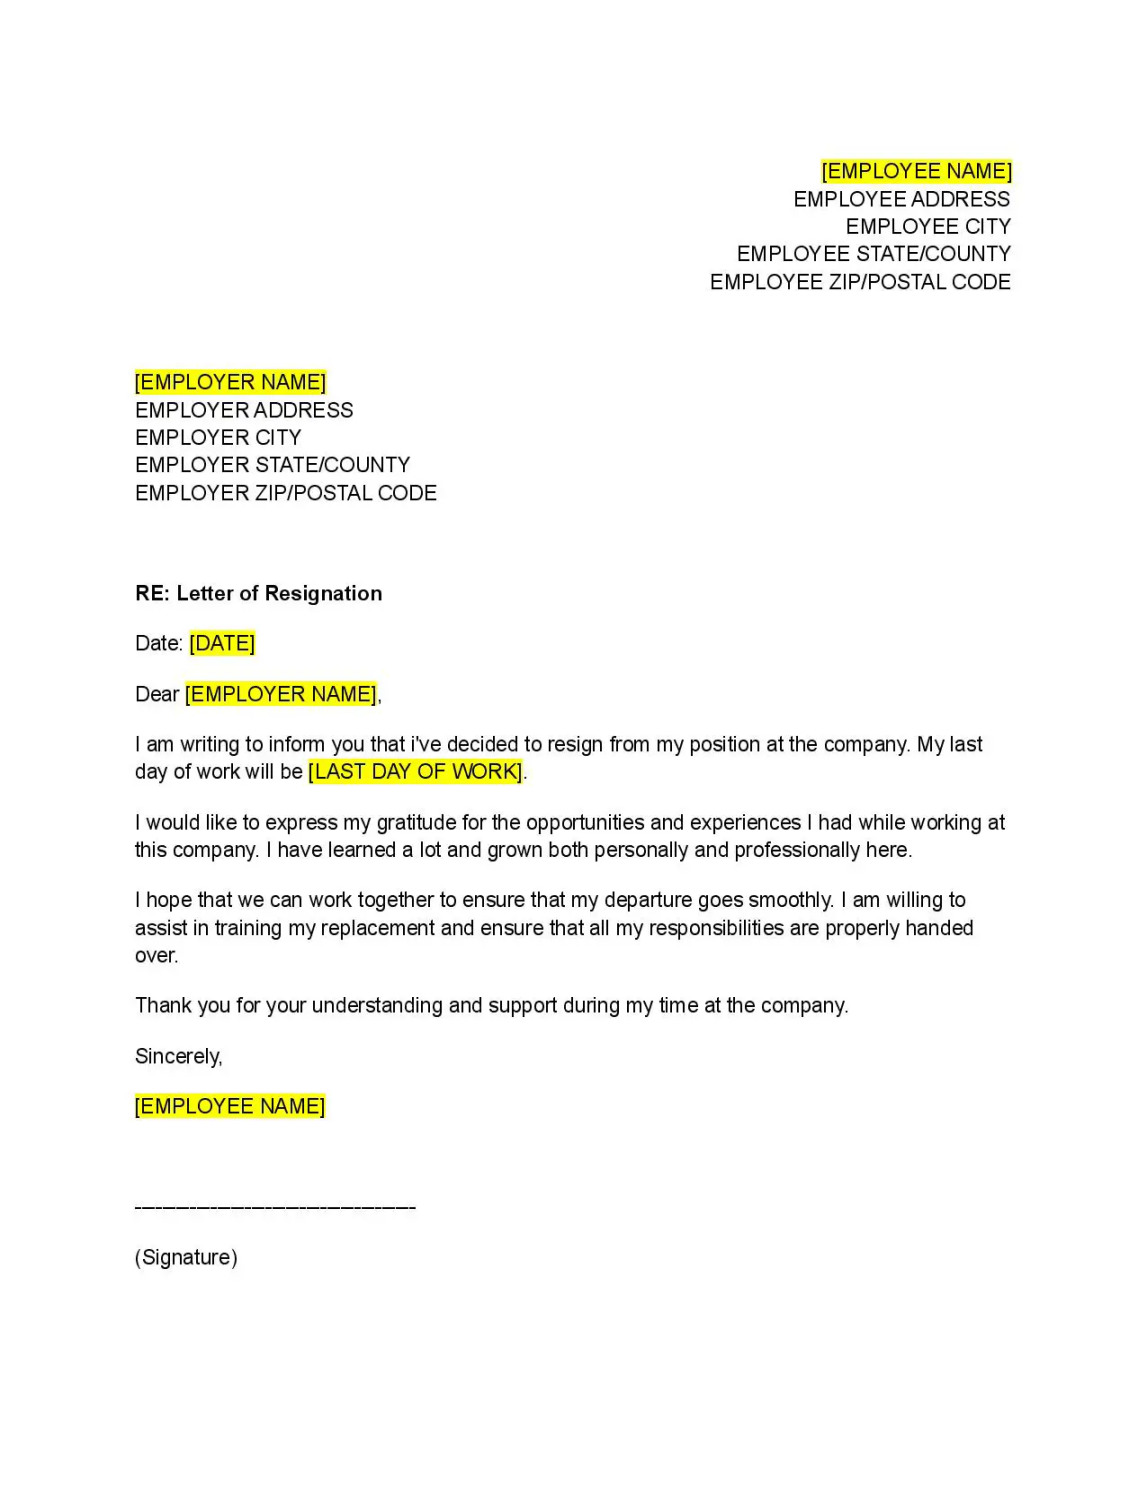 Resignation Letter Template - Free Download - Easy Legal Docs